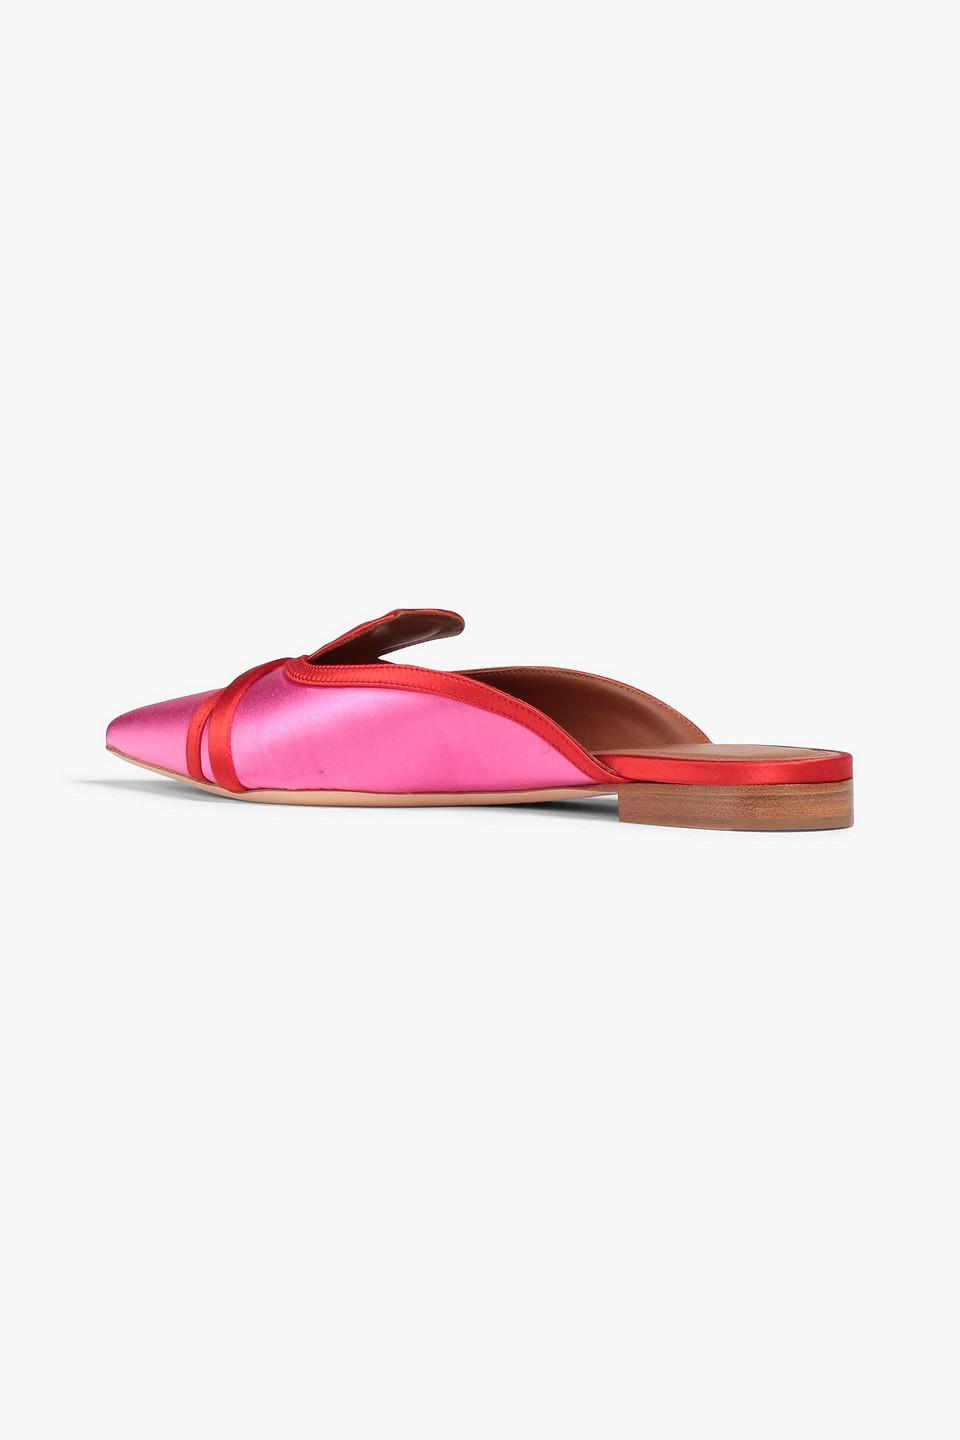 Malone Souliers Two-tone Satin Slippers in Red | Lyst UK